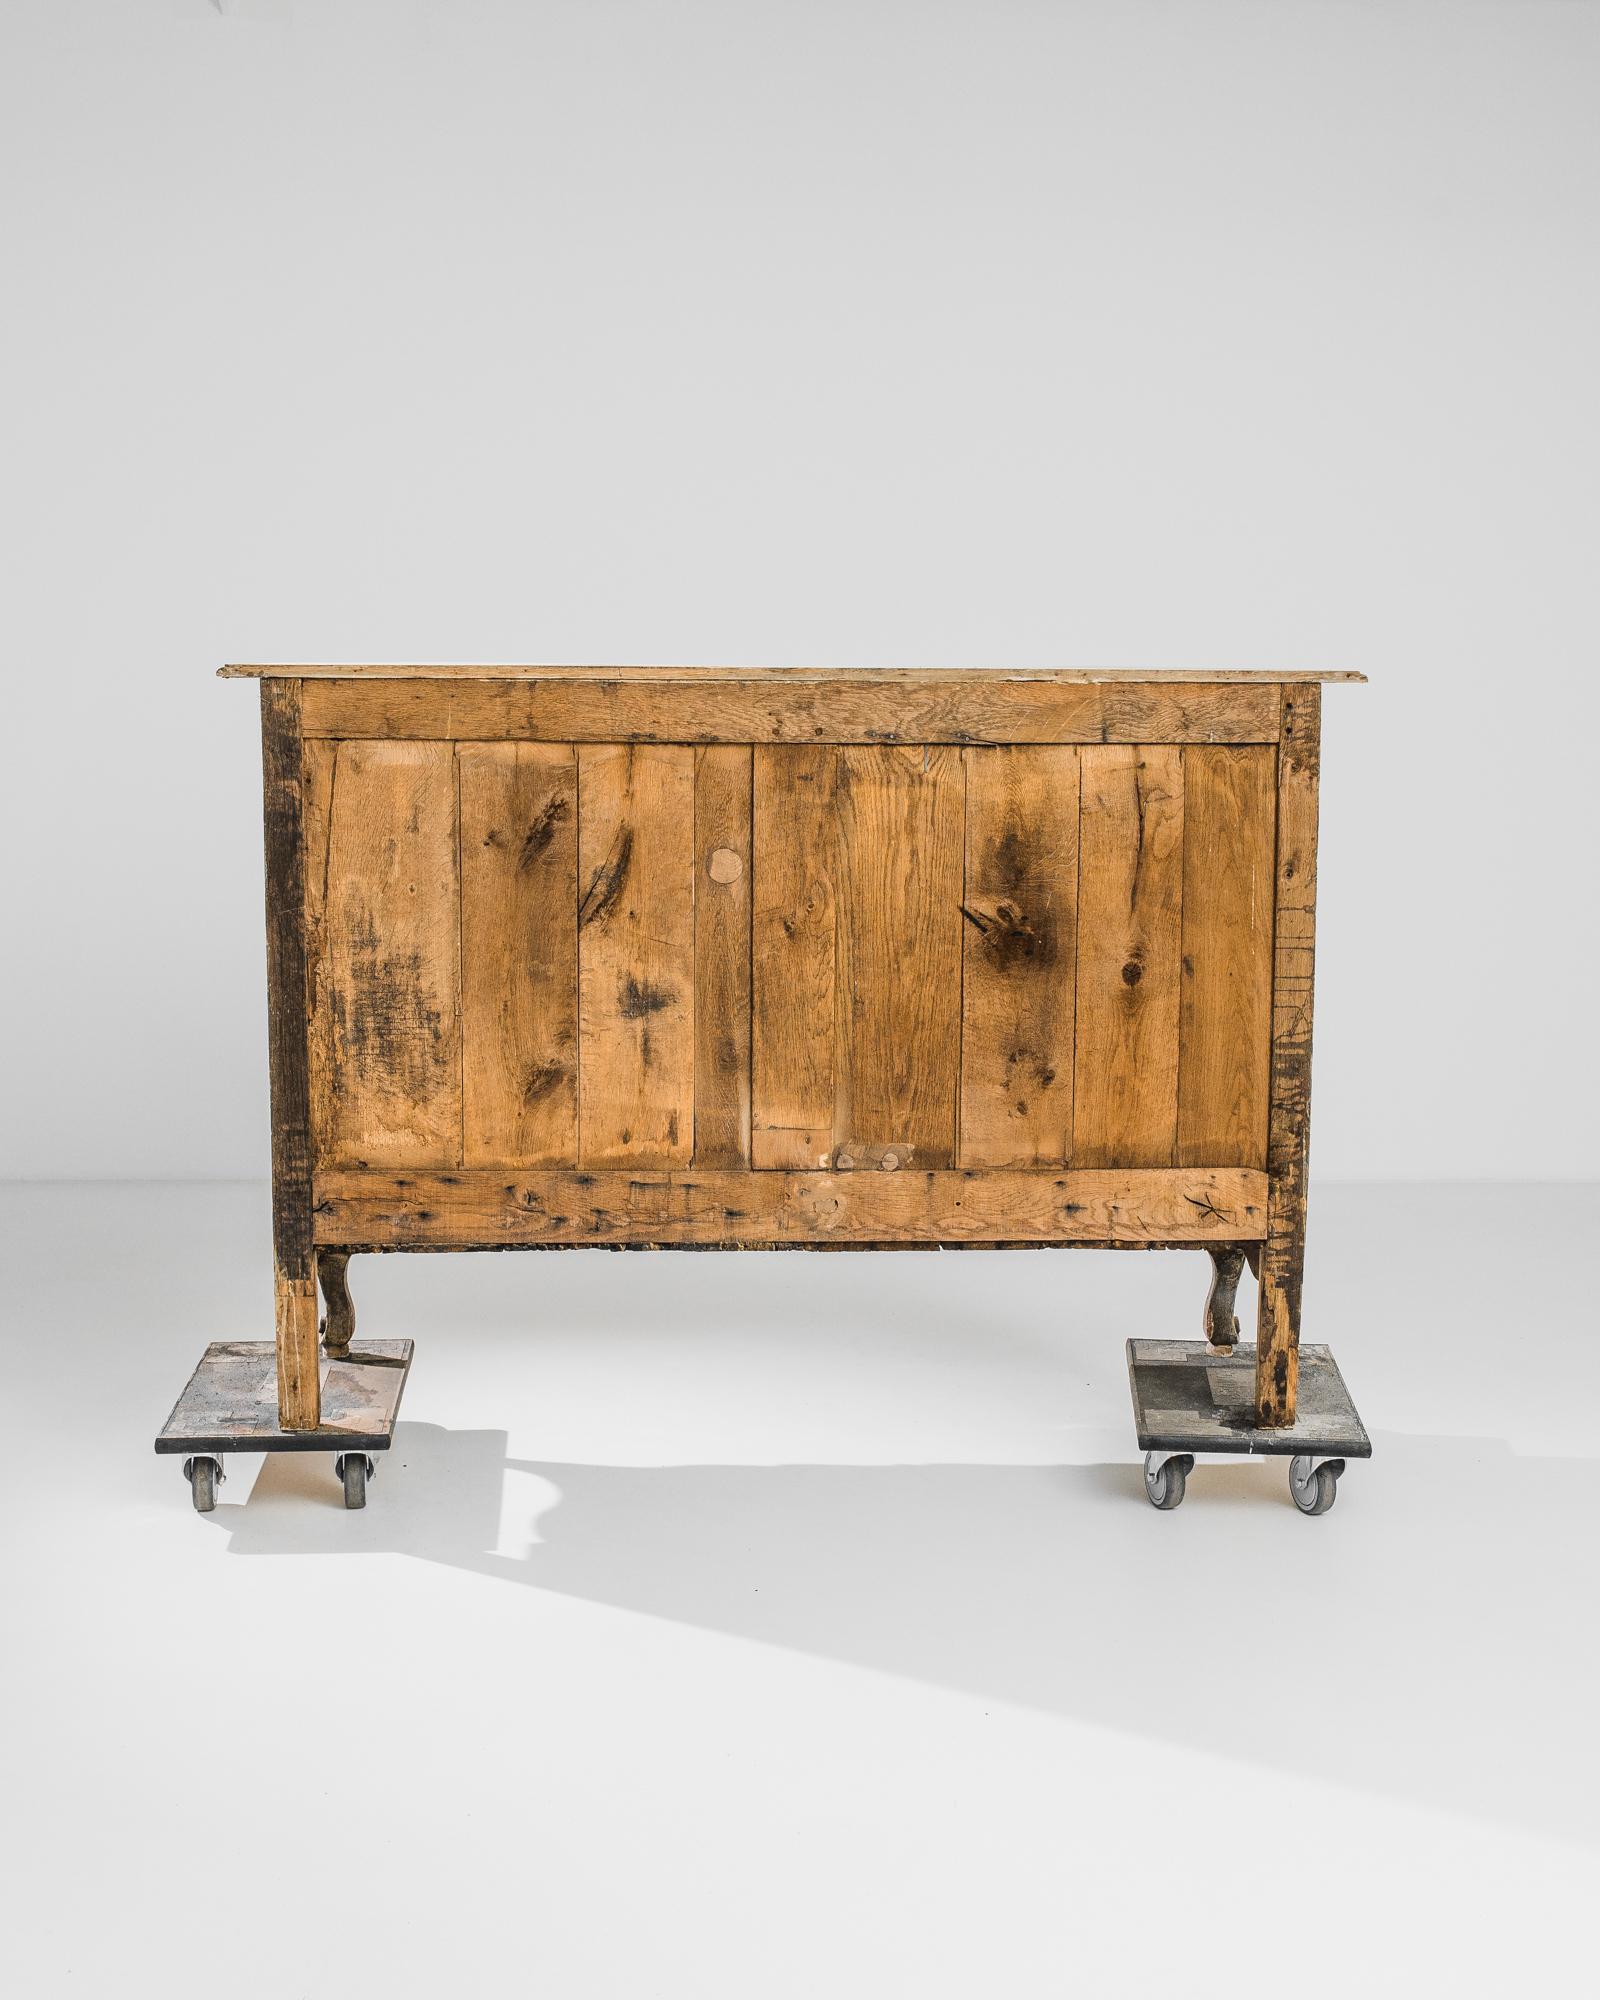 A bleached oak buffet from France, produced circa 1840. A chiselled buffet, featuring three sliding drawers and a lower double cabinet of two shelves, supported by a pair of cabriole front legs. A refined silhouette flanked by geometric panels,